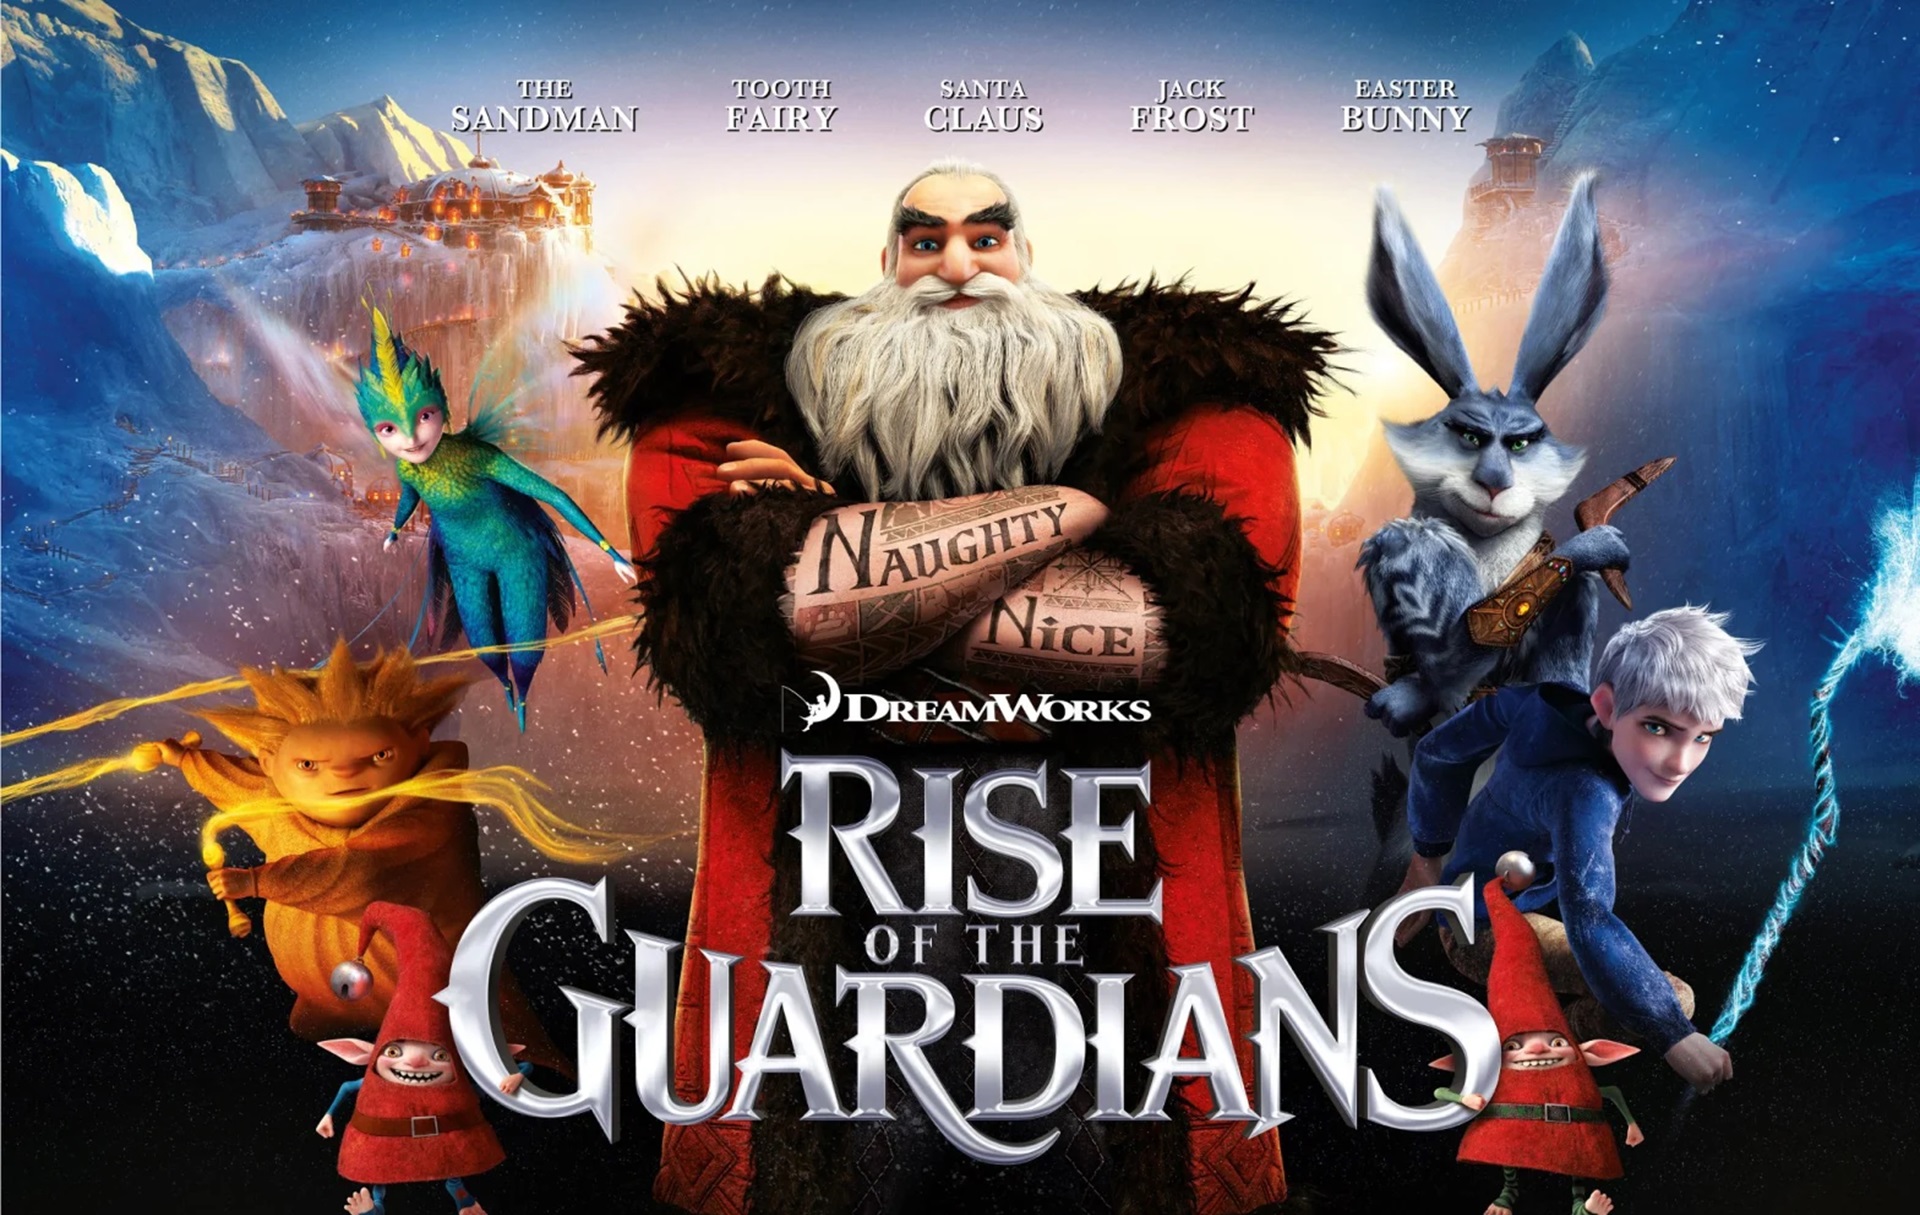 <p>While this might not be classified as 100% Christmas film, your kids will enjoy seeing all of their favorite holiday and mythological characters in action: from Jack Frost, to Santa, to the Tooth Fairy and the Easter Bunny.</p>